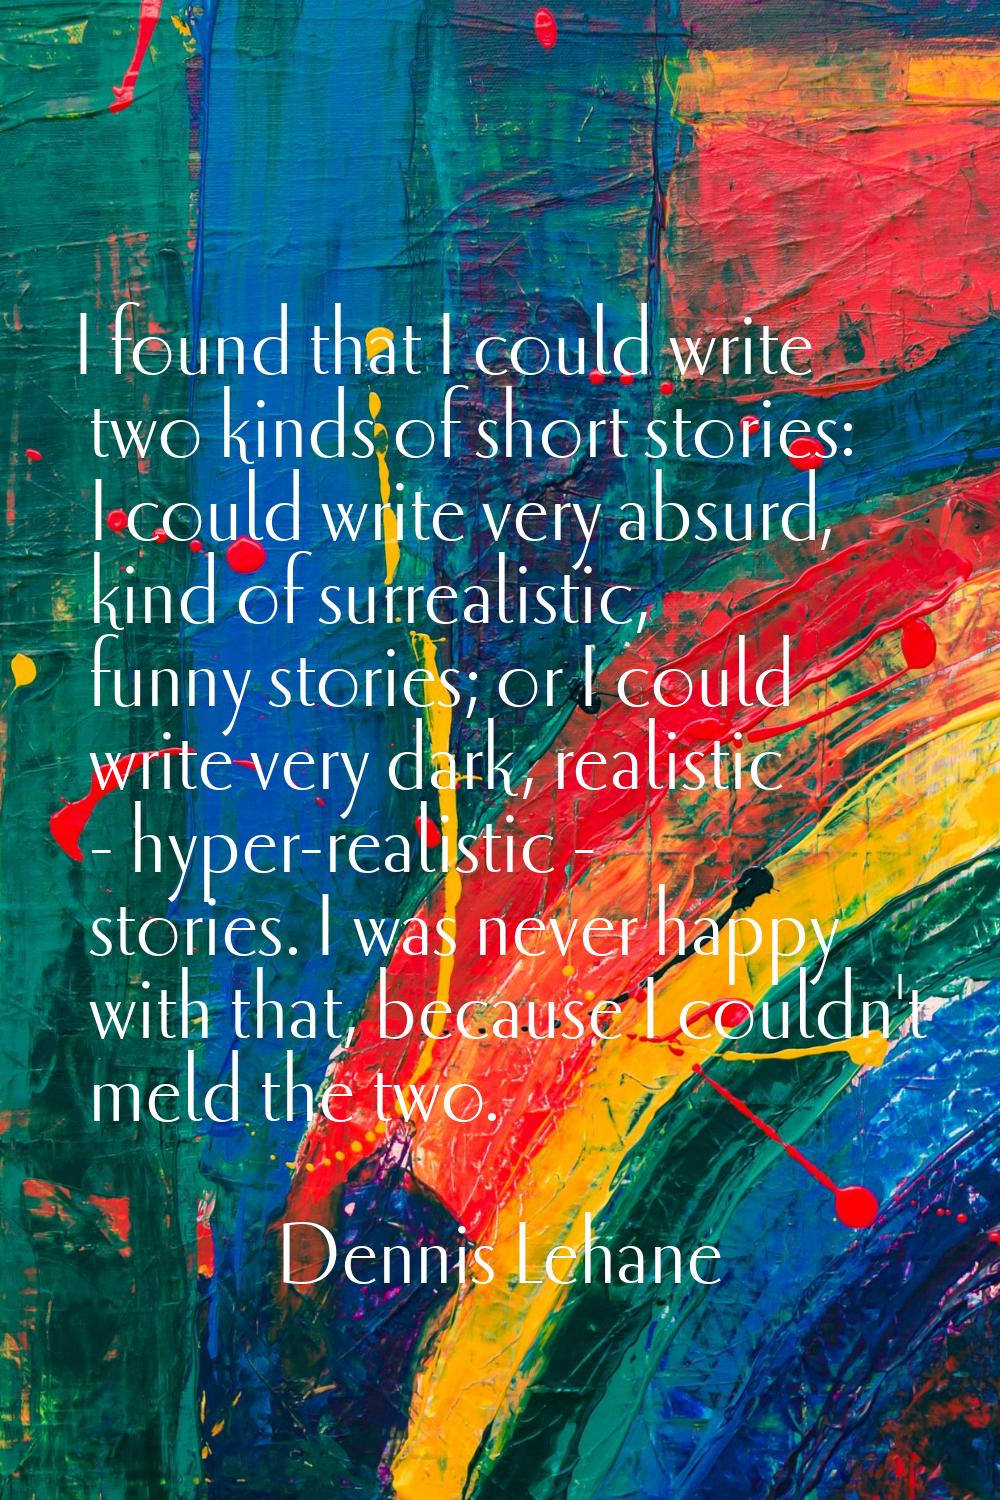 I found that I could write two kinds of short stories: I could write very absurd, kind of surrealis